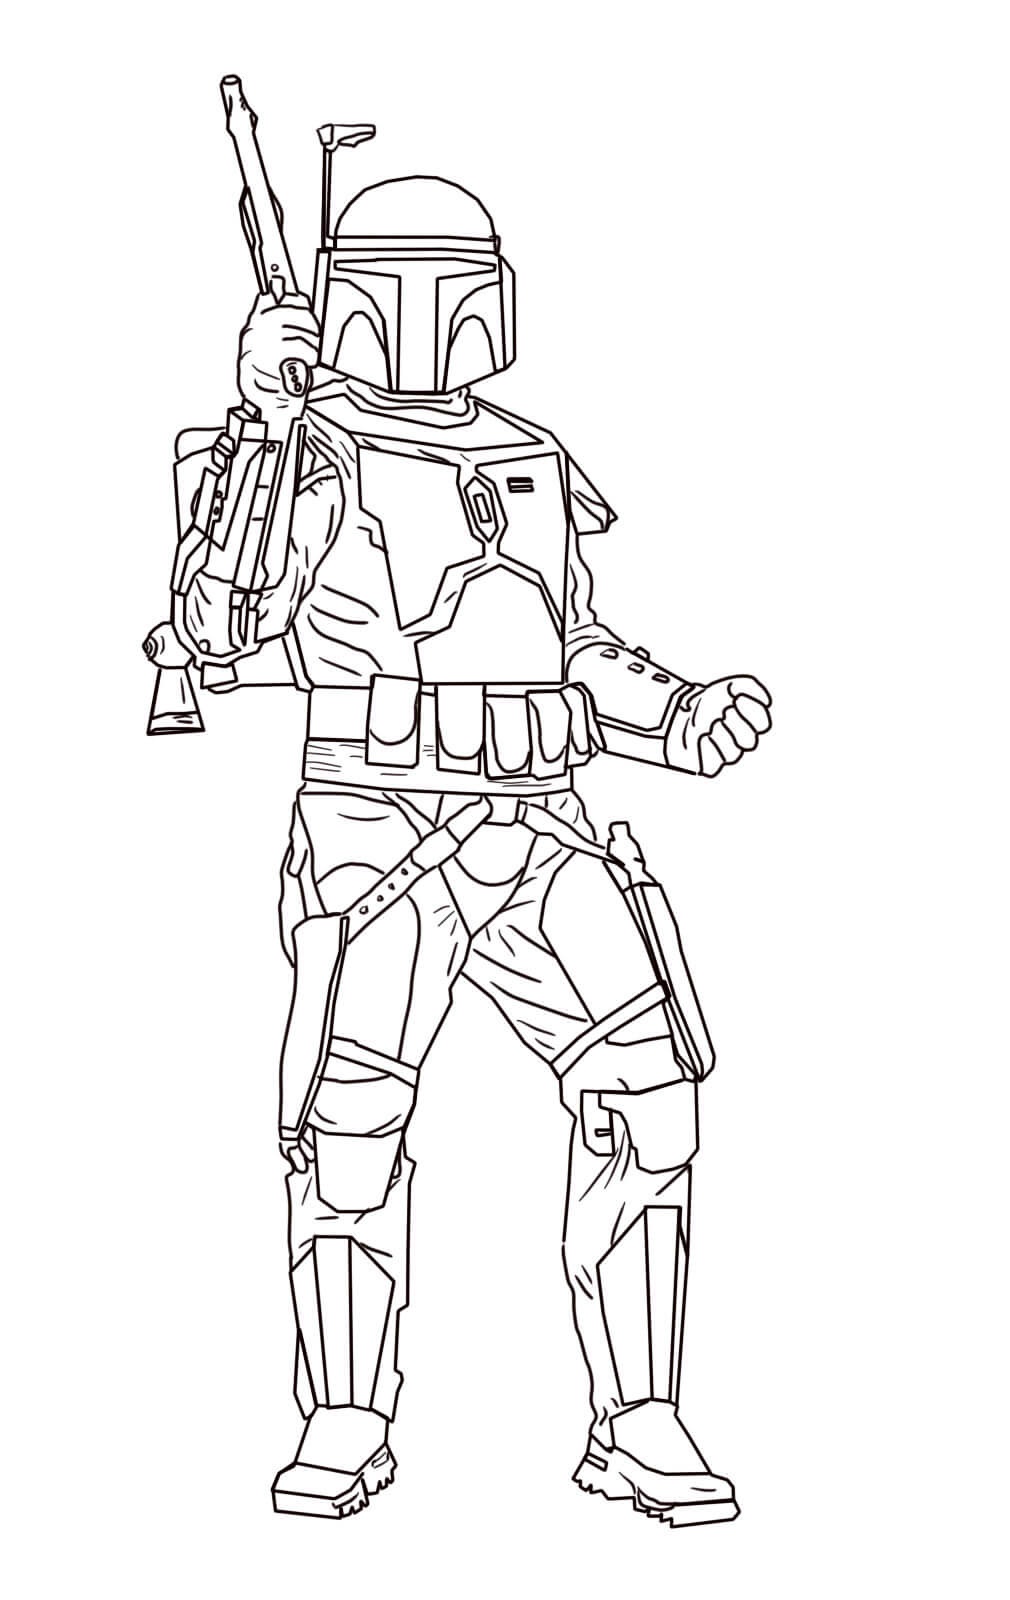 Jango Fett Star Wars Episode II Attack Of The Clones Coloring Page